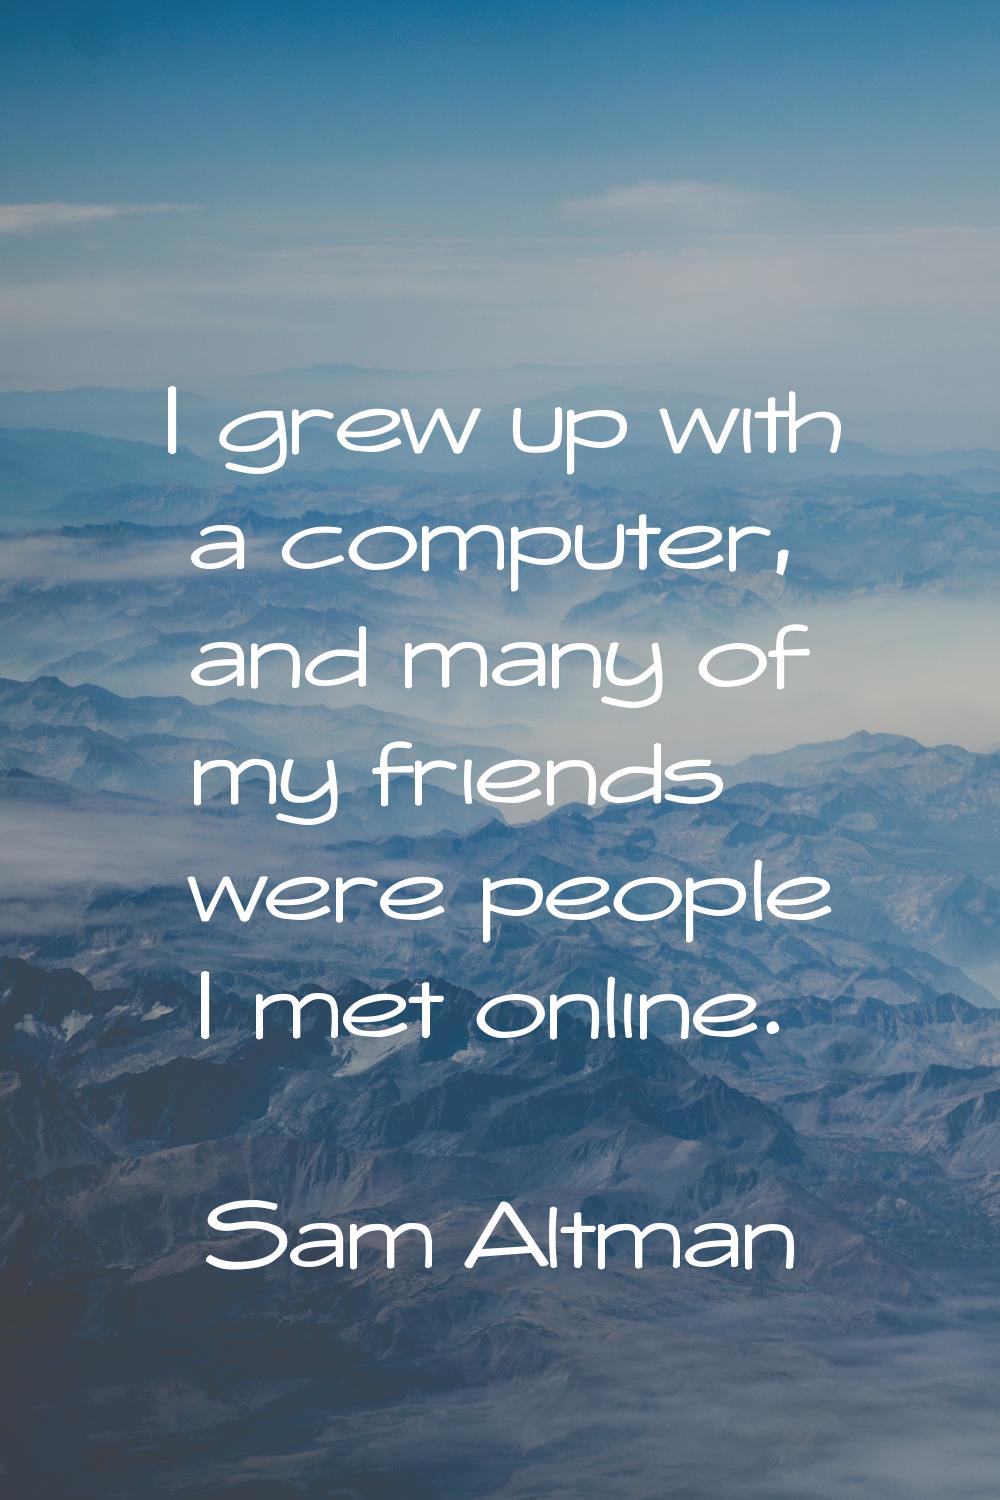 I grew up with a computer, and many of my friends were people I met online.